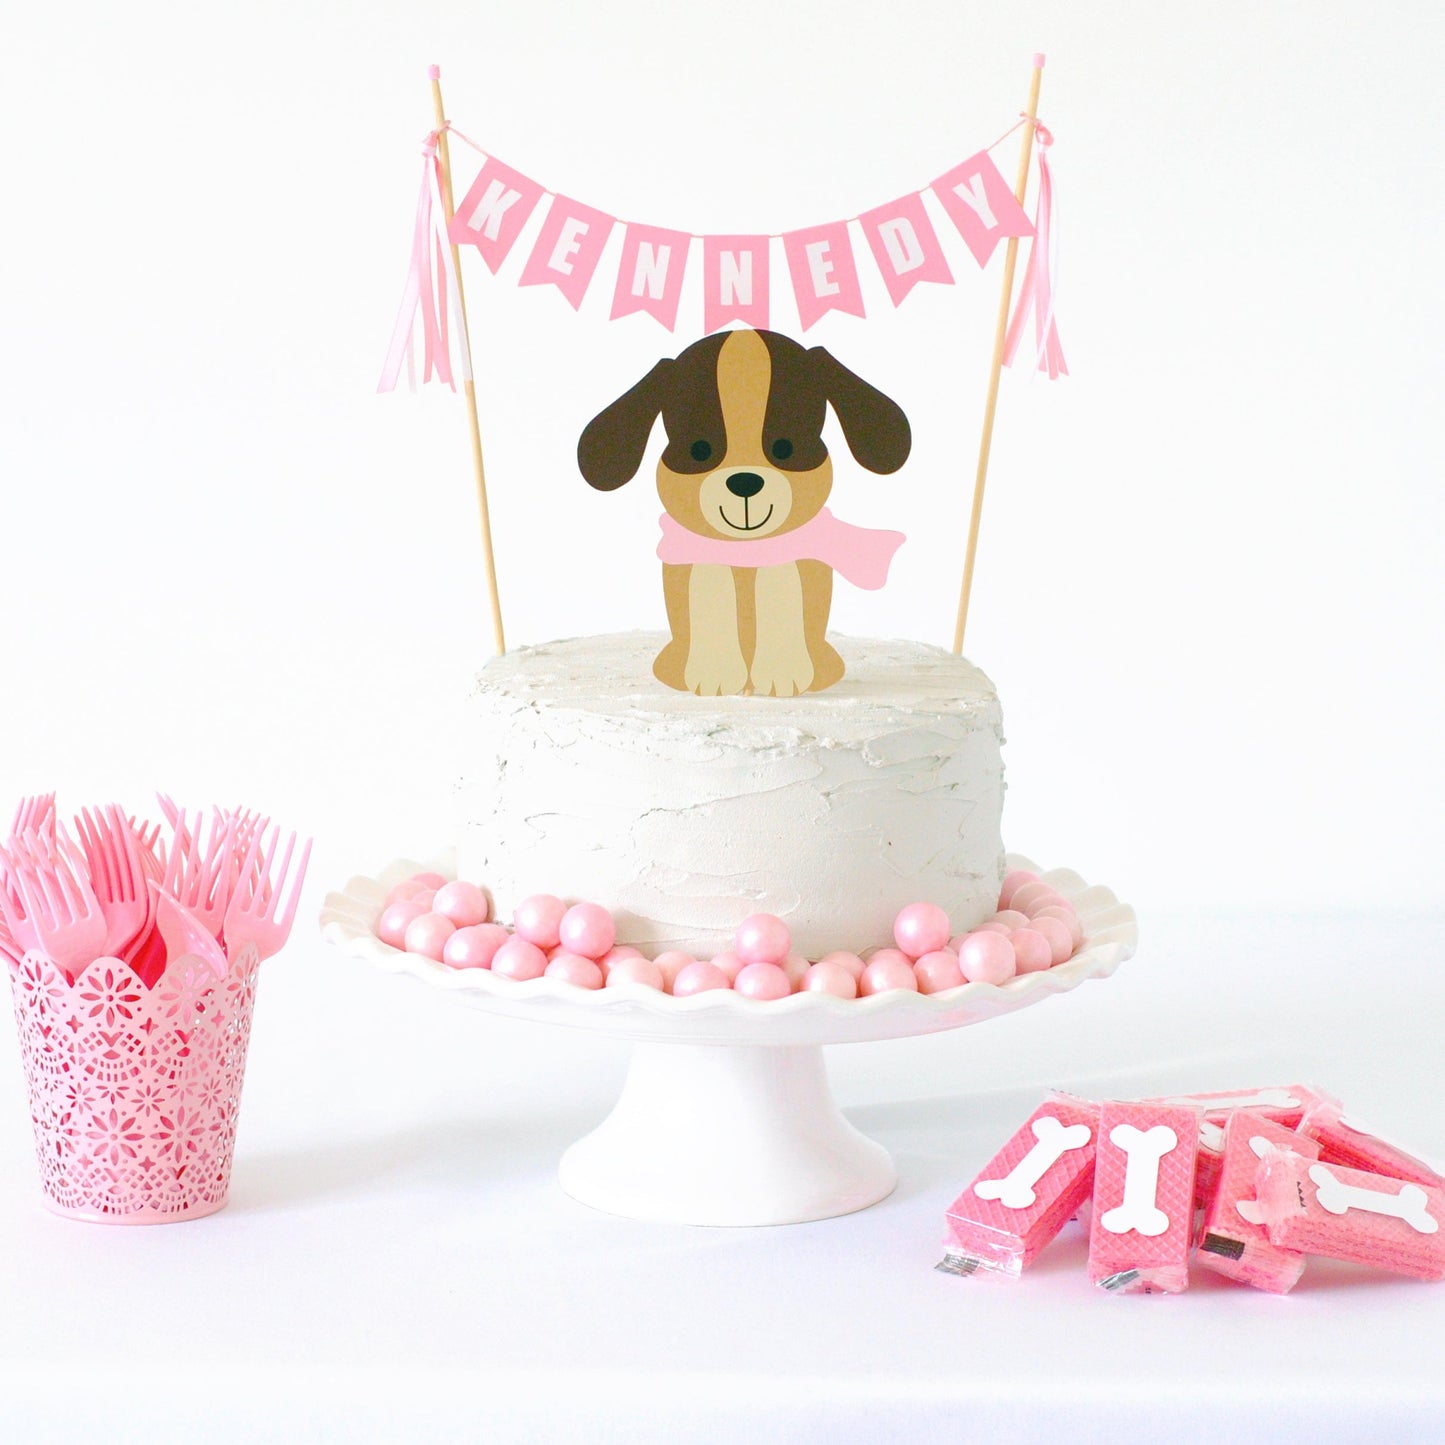 
                  
                    puppy birthday party cake topper set with brown dog wearing a light pink scarf and pink name cake banner
                  
                